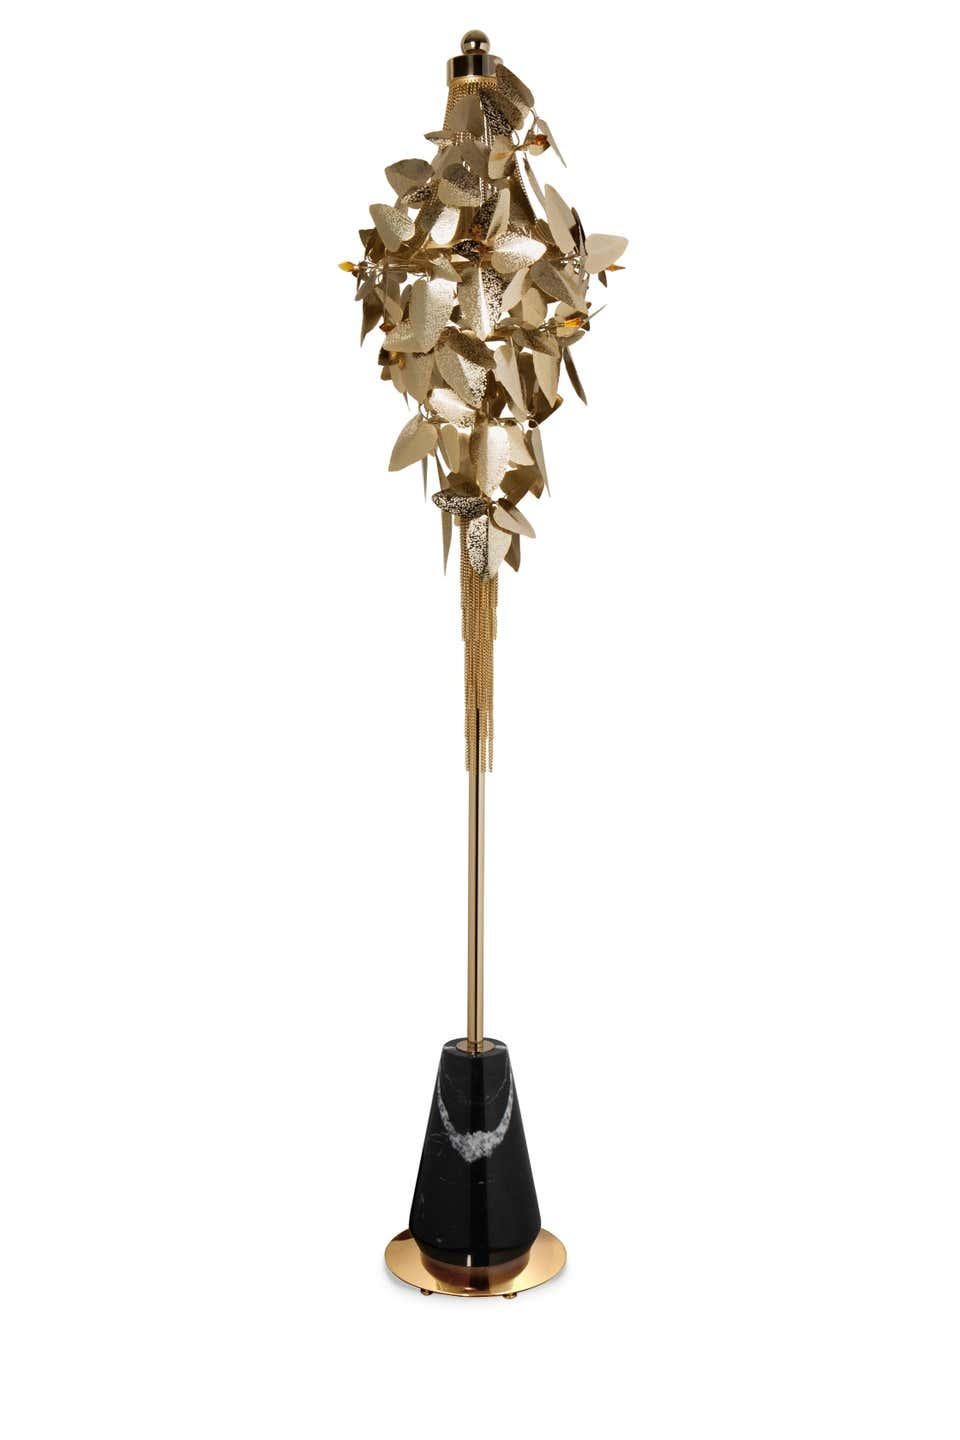 Floor lamp in gold-plated brass, marble and Swarovski crystals

Standard finishes
Body: Hammered brass, gold-plated, Nero Marquina marble
and amber Swarovski crystals

Lighting: 8x g9 halogen bulbs. (40W max), USA not included.
Voltage: